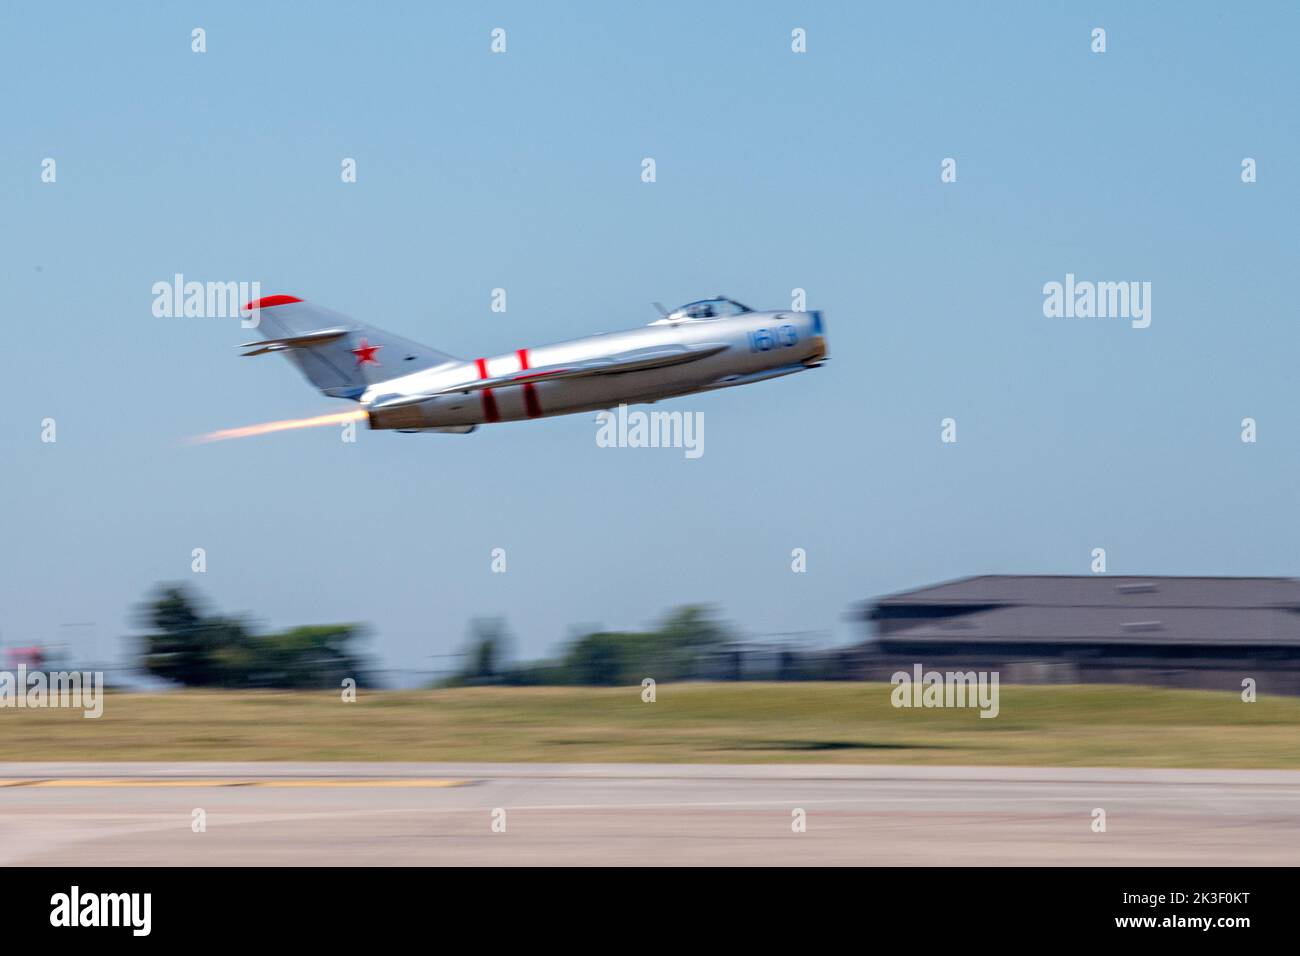 Randy Ball, performs a high-speed pass in a Soviet era MiG-17F fighter aircraft during the 2022 Frontiers in Flight Air Show at McConnell Air Force Base, September 24, 2022 in Wichita, Kansas. Stock Photo